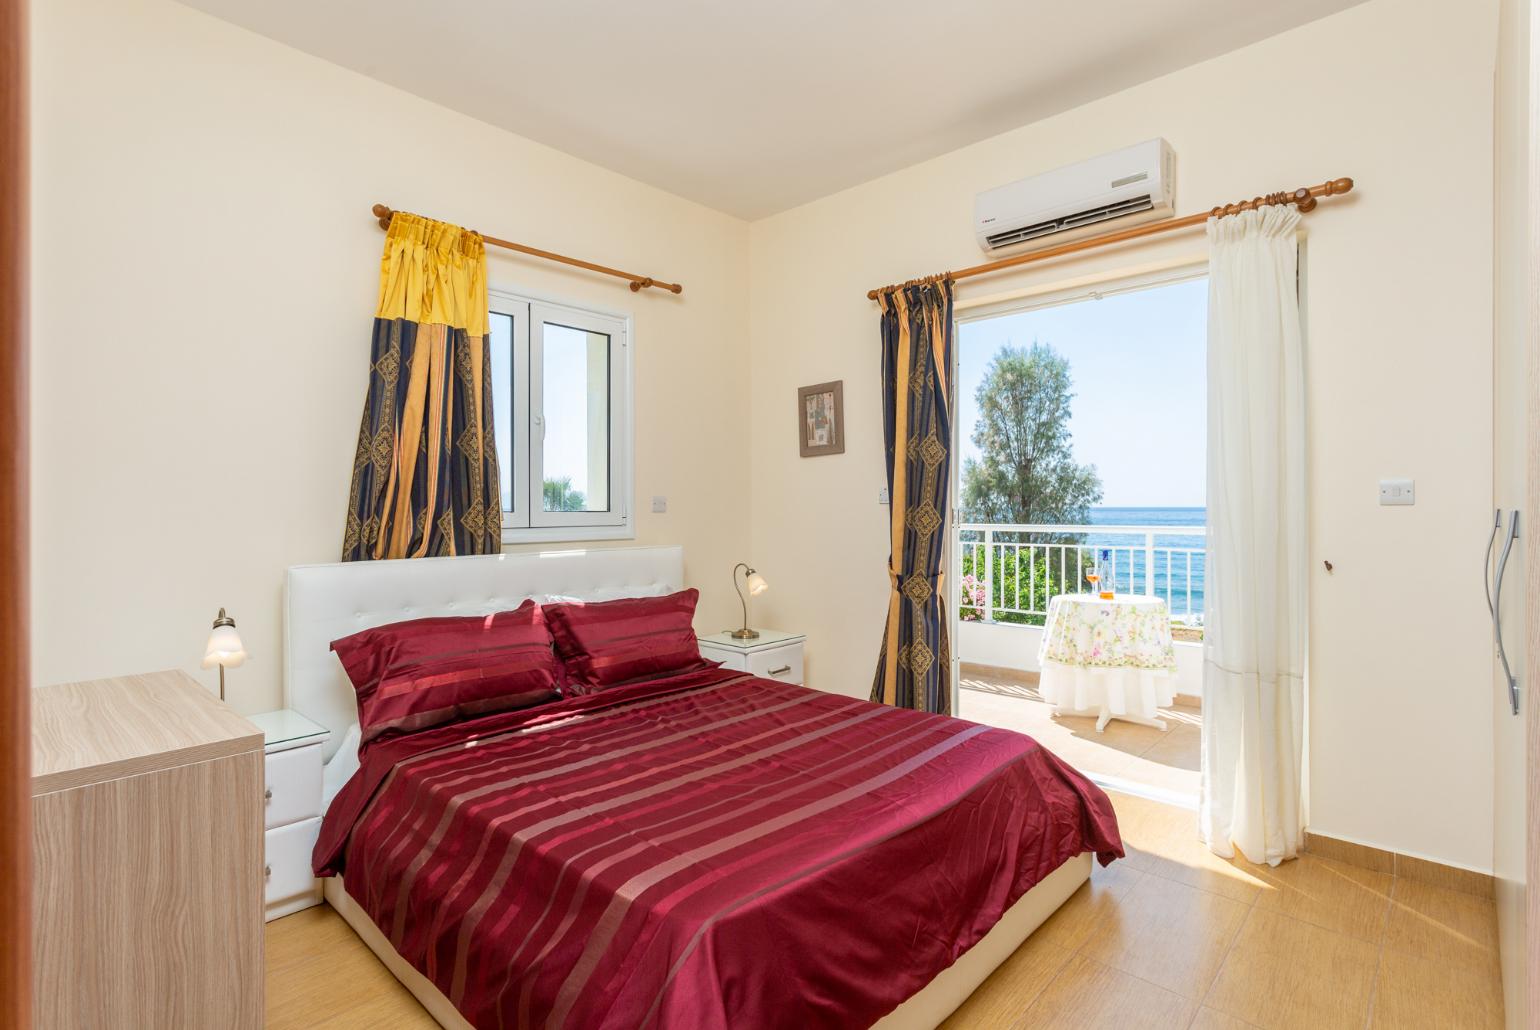 Double bedroom with en suite bathroom, A/C, and upper terrace access with panoramic sea views